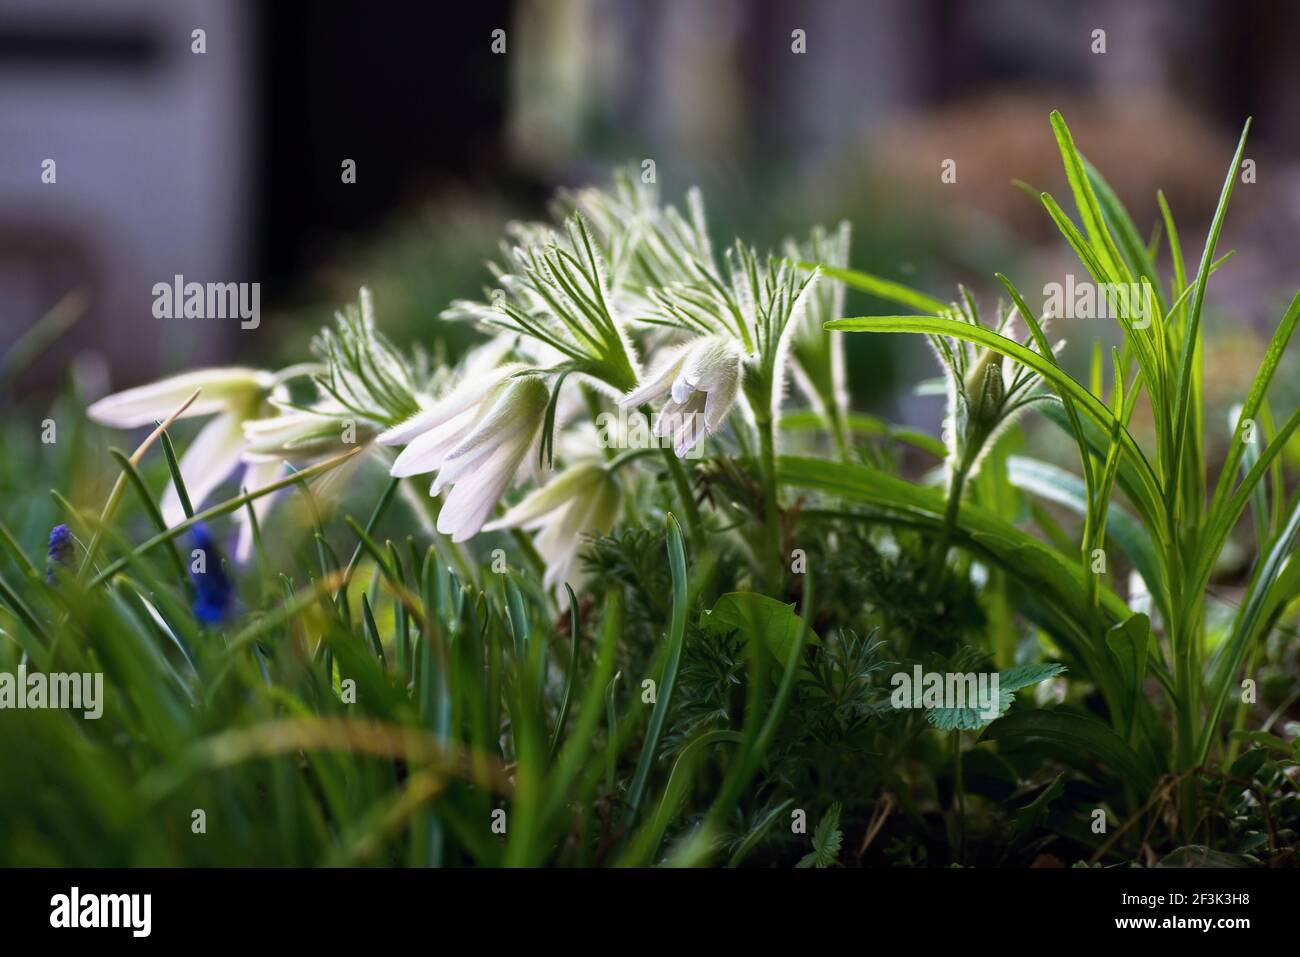 Bunch of pasque (Pulsatilla) hairy  flower in grass in garden. This flower called Easter flower, too. It is one of first spring flowers in garden. Stock Photo